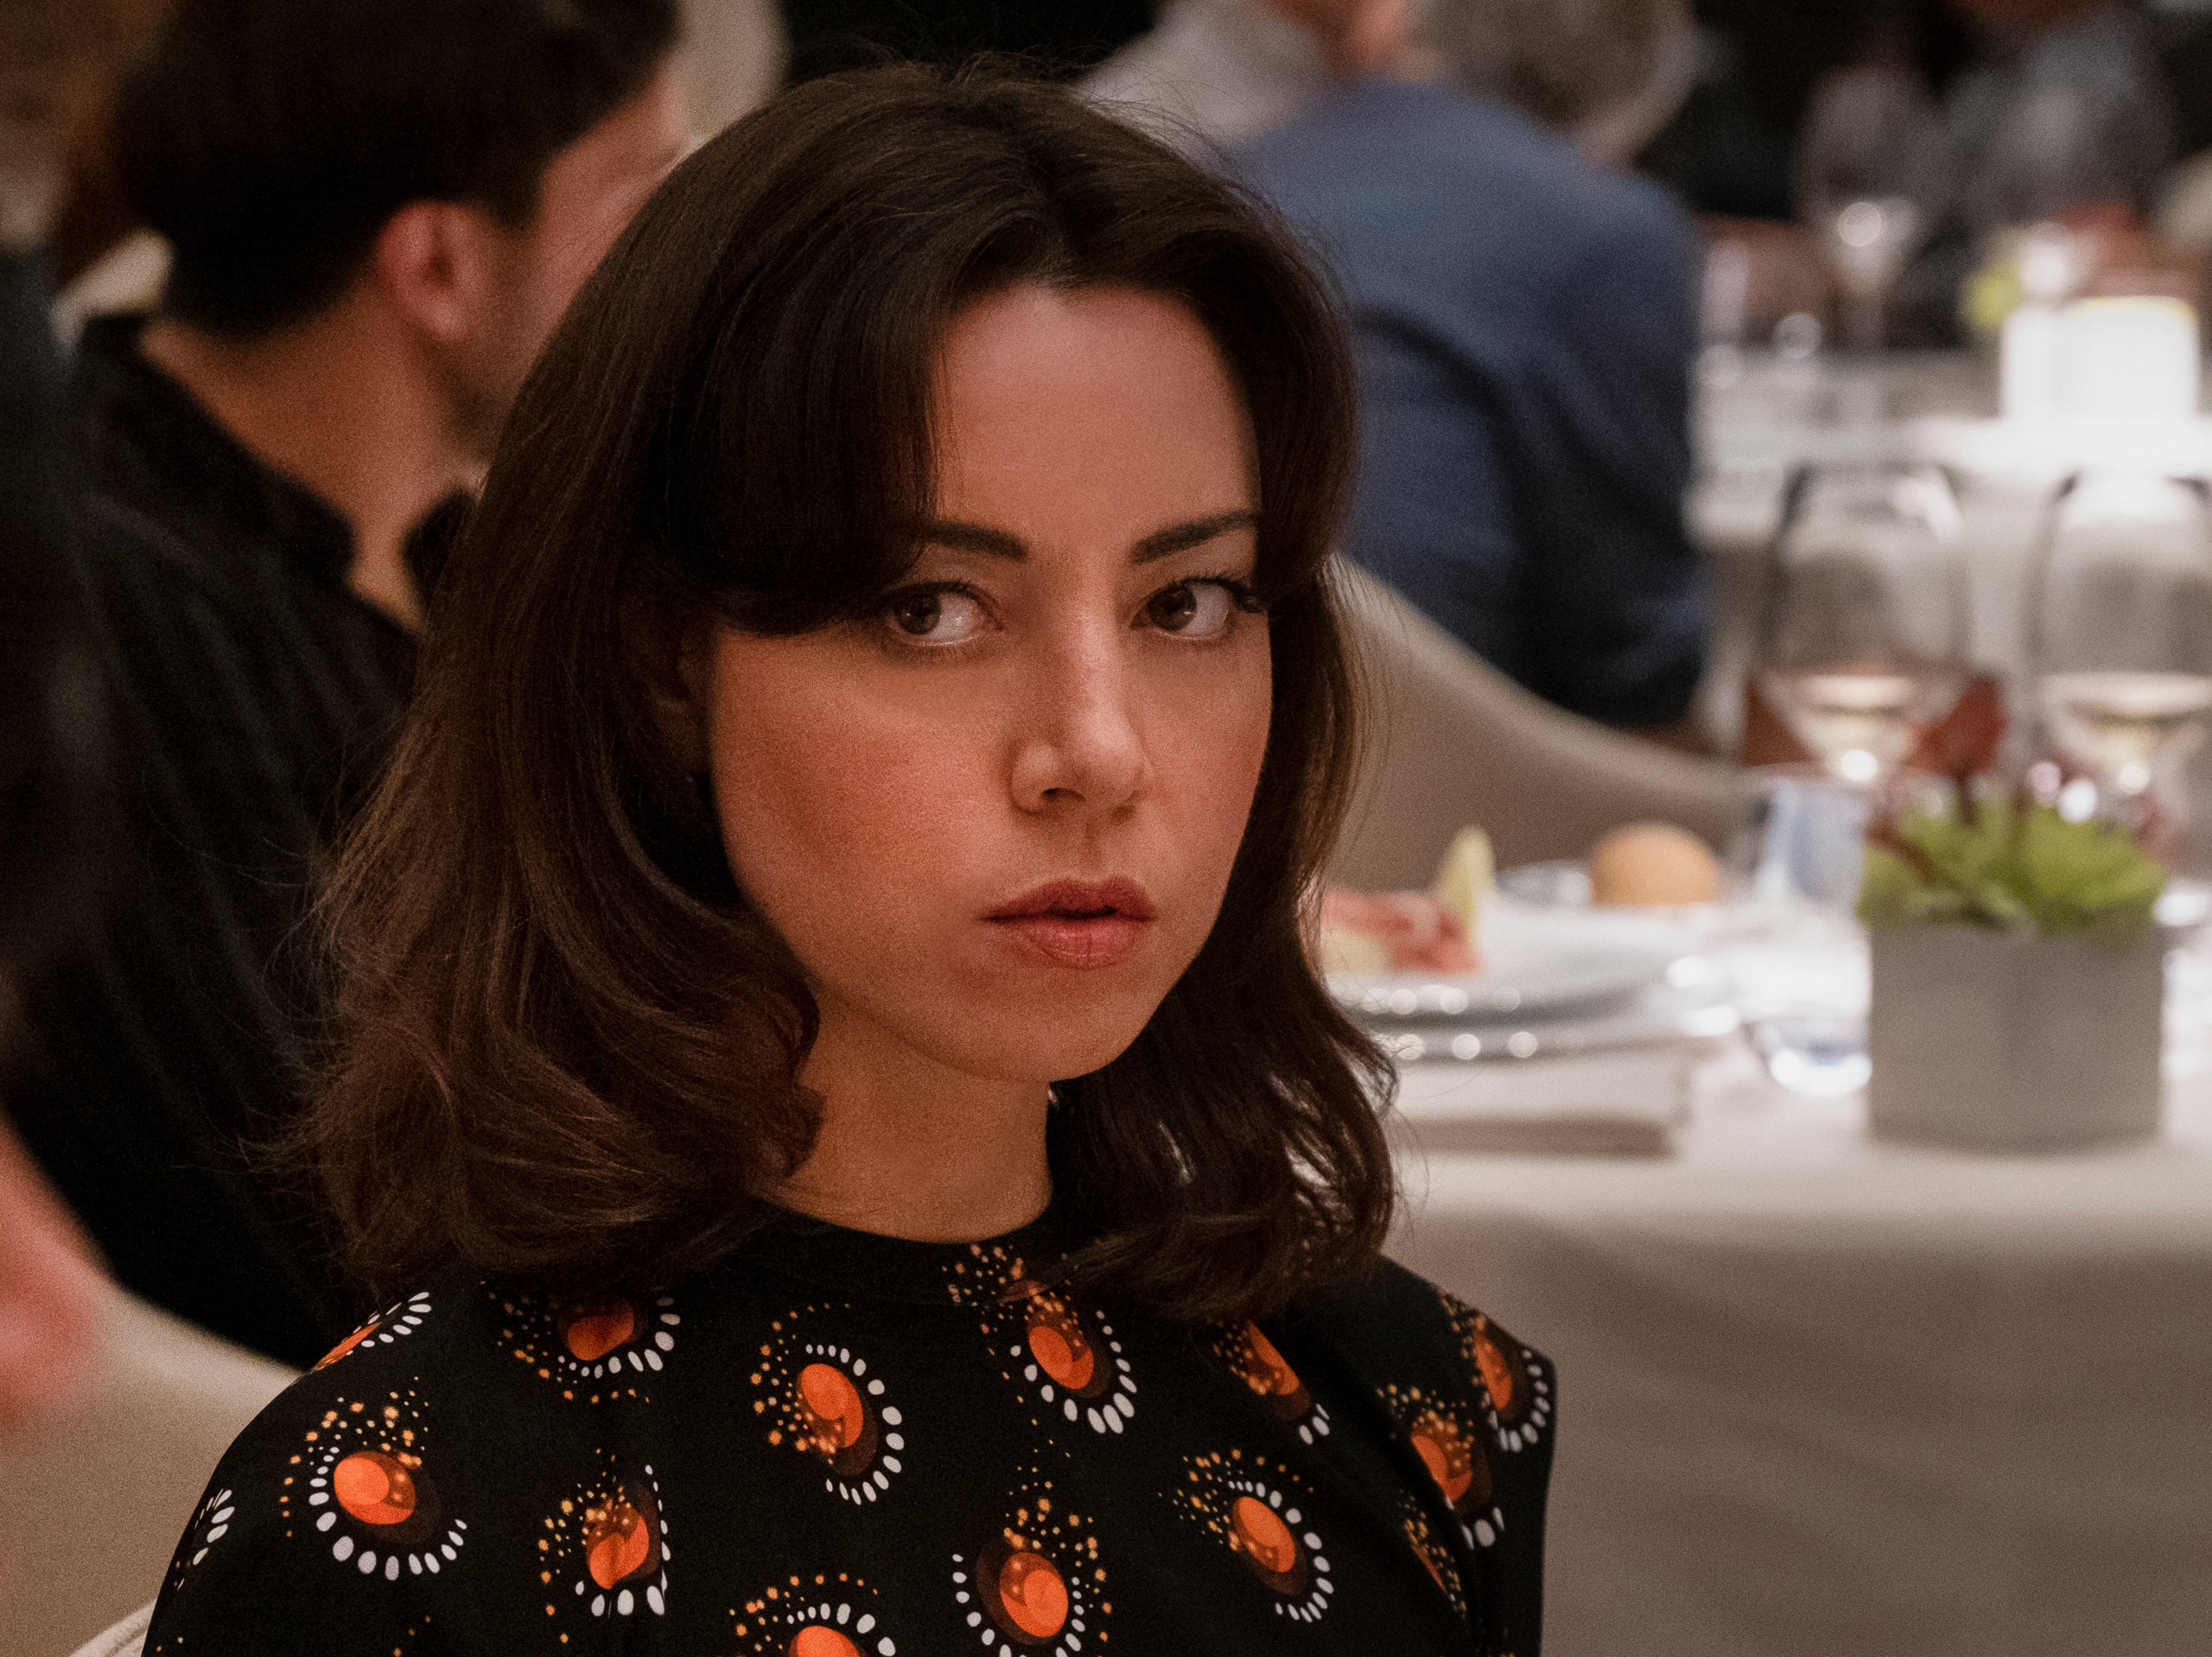 Aubrey Plaza jokes about how she became friends with White Lotus co-star: 'You stalked me'